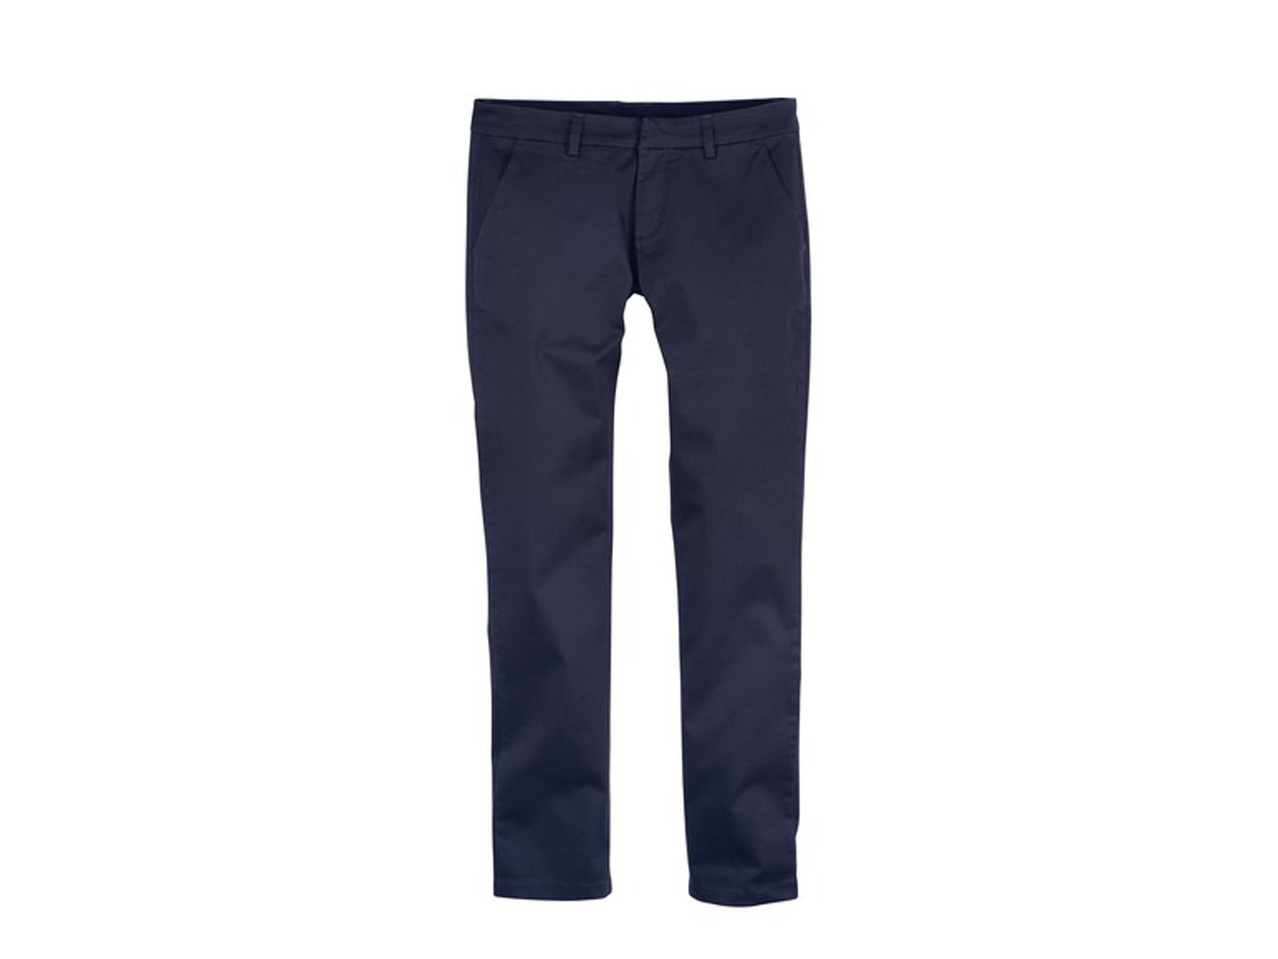 LIVERGY Men's Twill Trousers